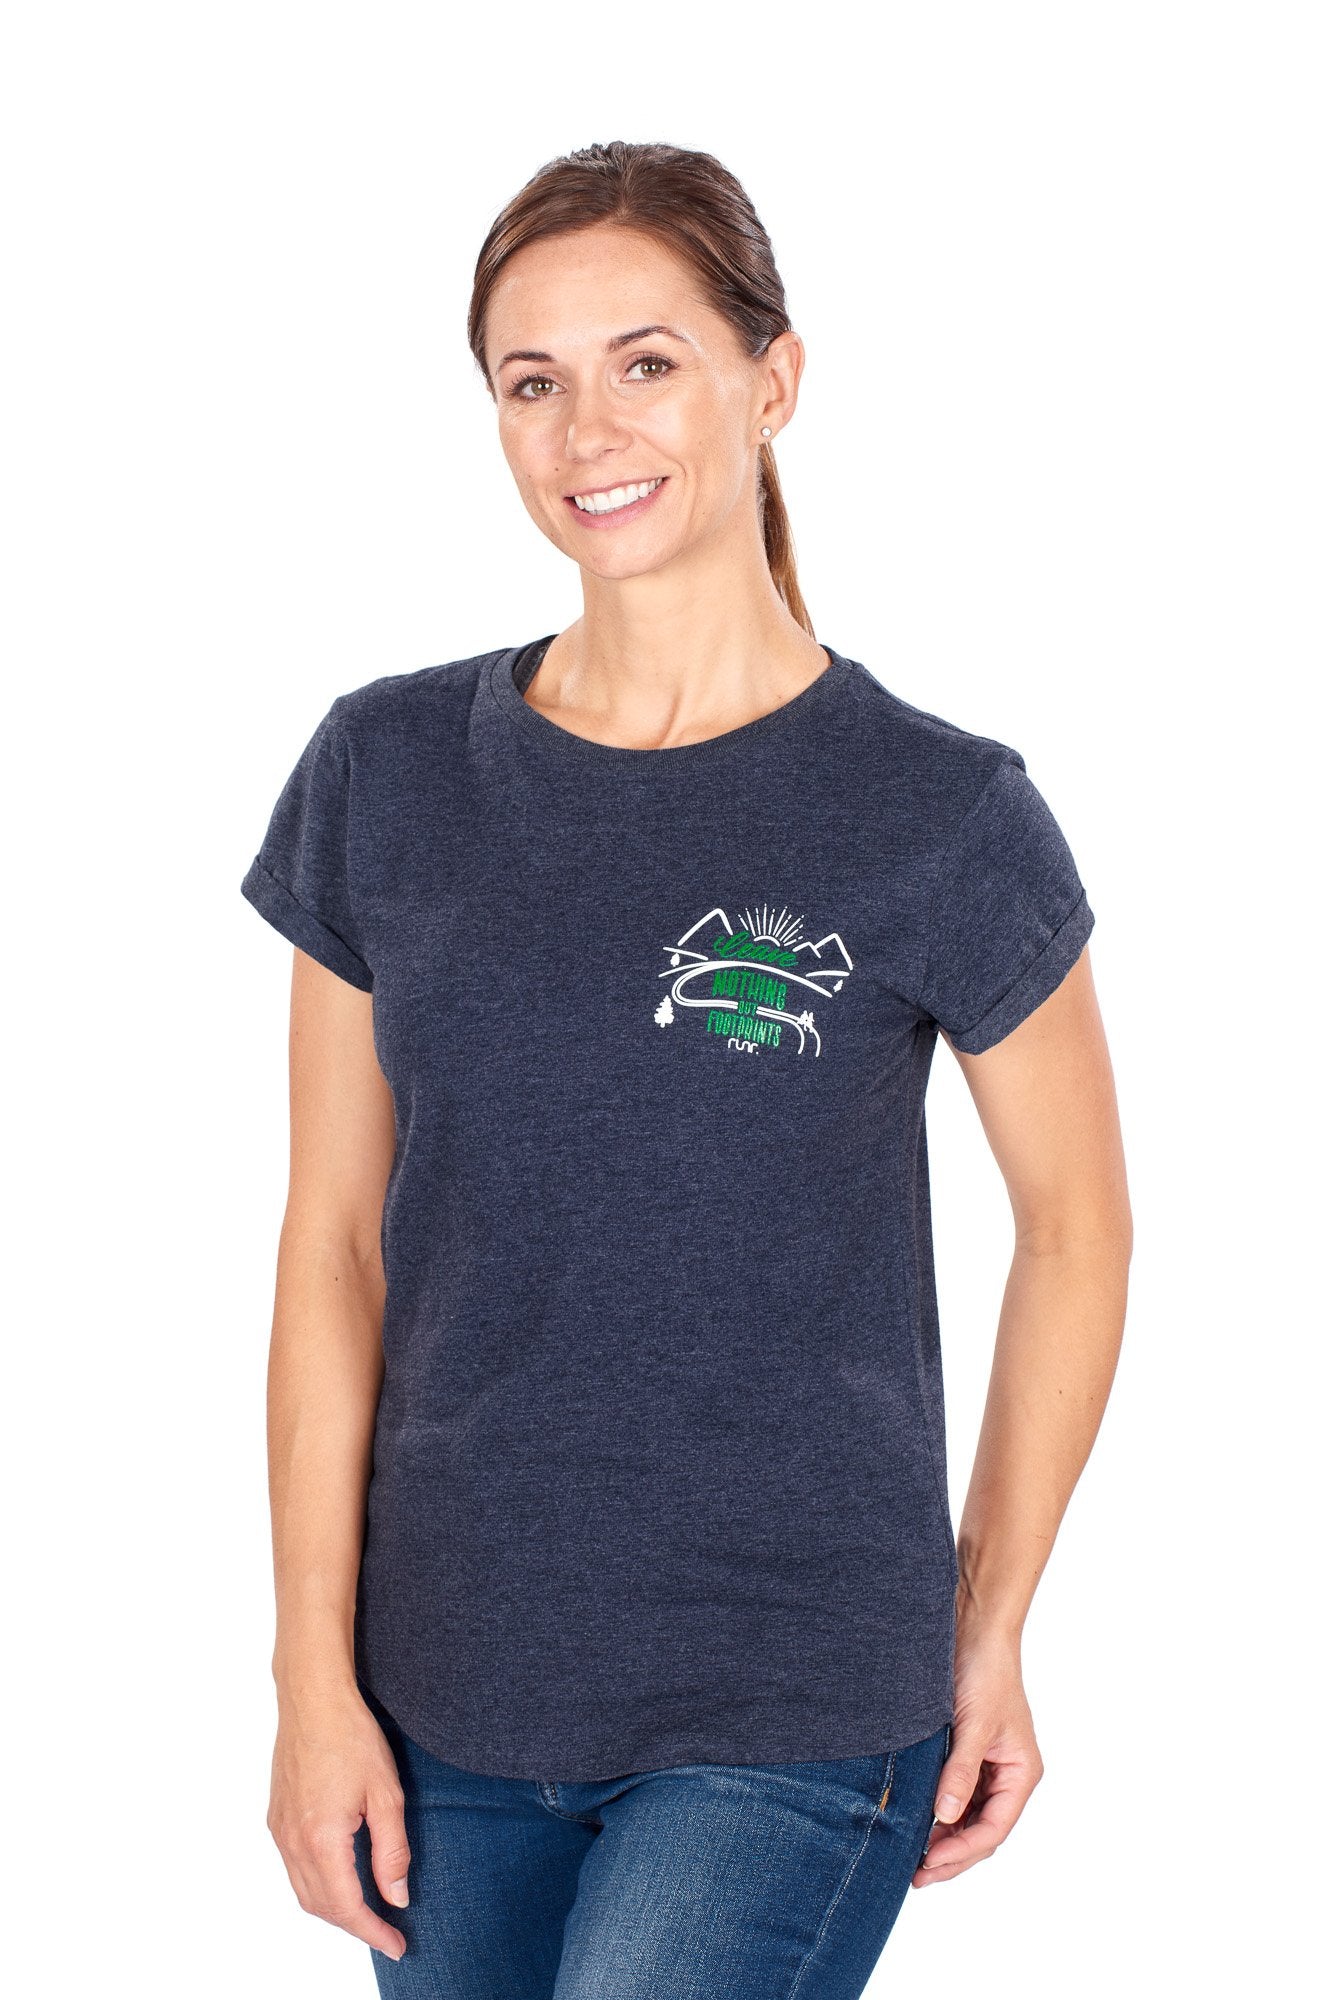 Women's 'Leave Nothing But Footprints' Runr T-Shirts - Navy